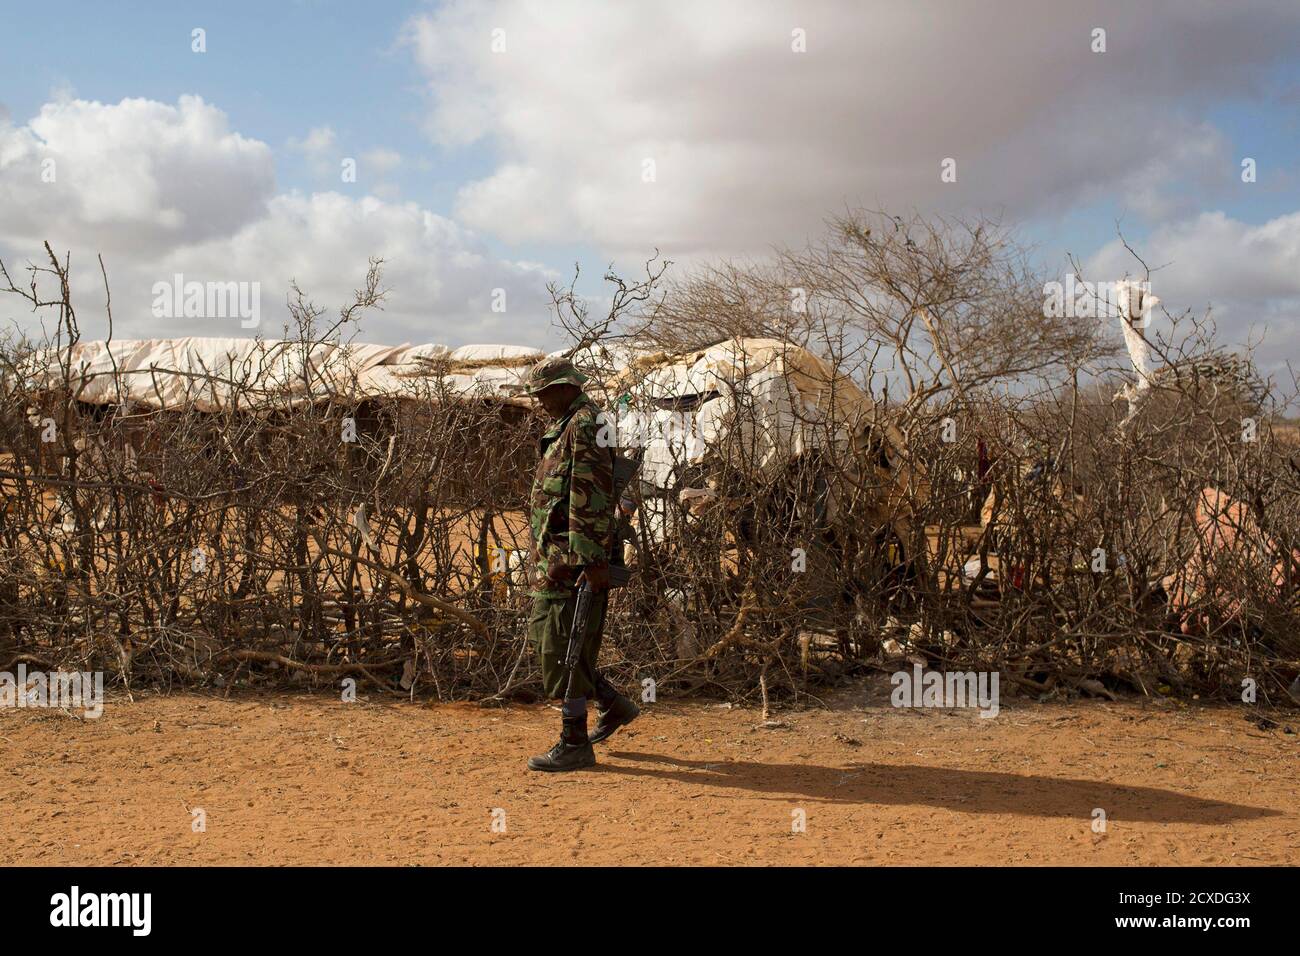 An administration police officer walks past a refugee compound at an extension of the Ifo camp, one of several refugee settlements in Dadaab, Garissa County, northeastern Kenya October 9, 2013.  REUTERS/Siegfried Modola  (KENYA - Tags: SOCIETY MILITARY) Stock Photo